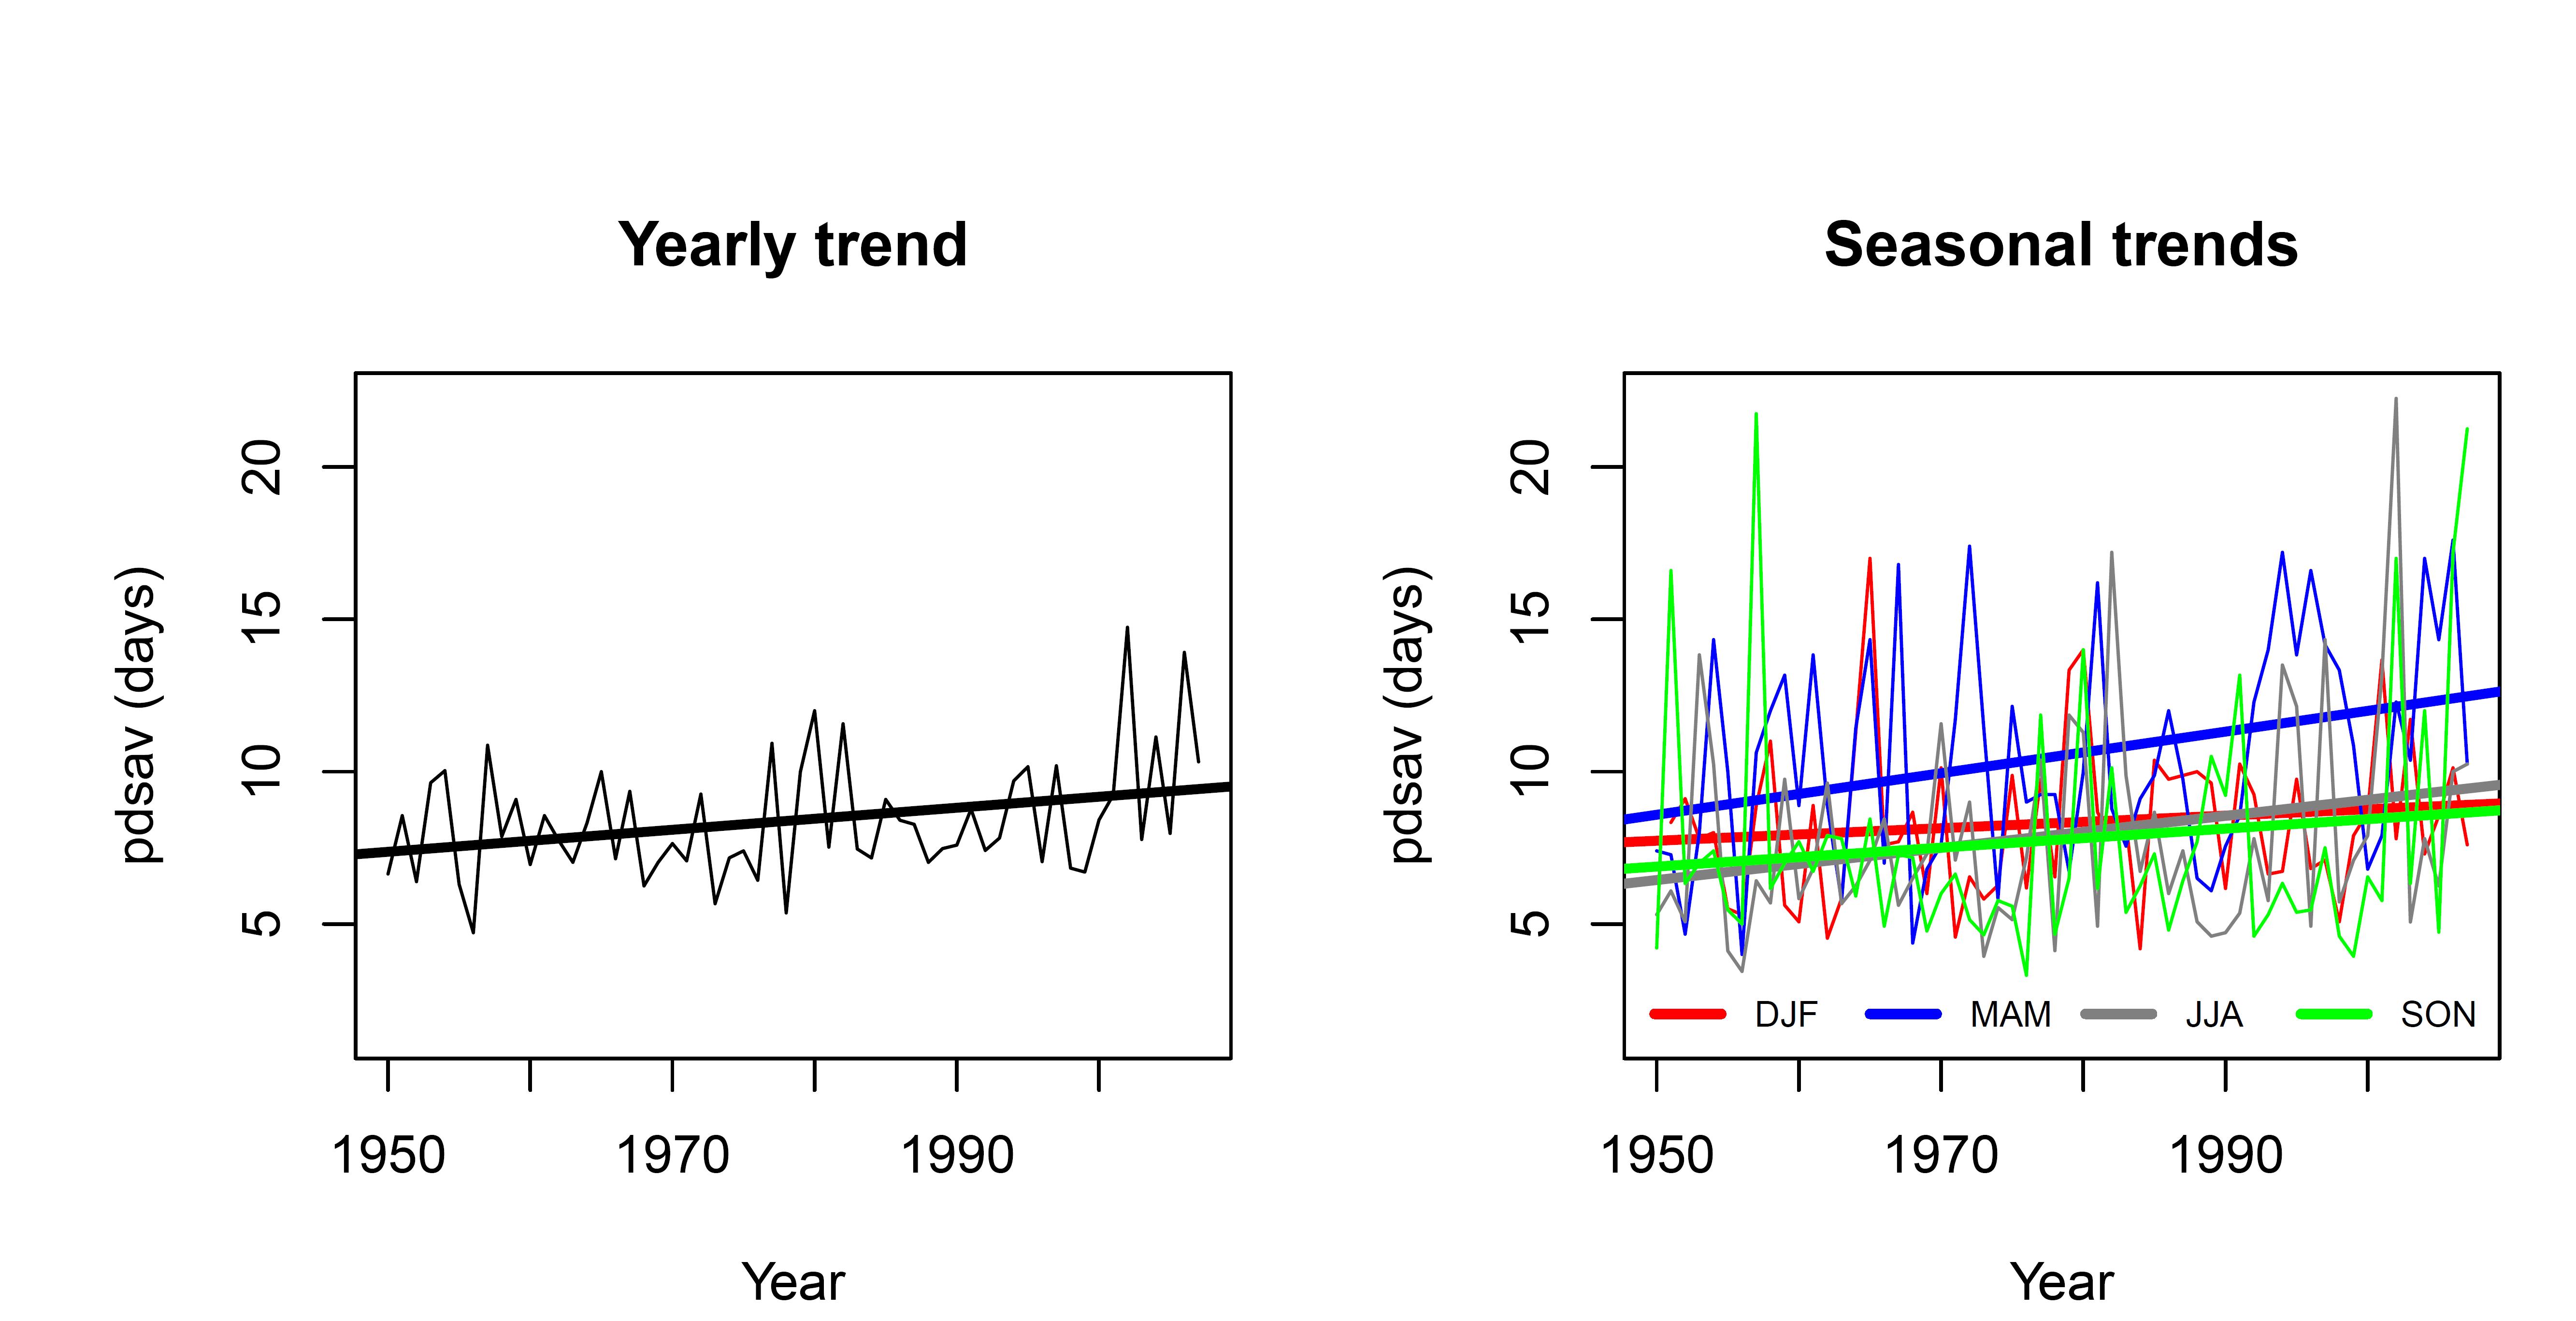 This is a set of new graphs showing the mean annual dry spell length (left) and seasonal dry spell length for December to January (DJF), March to May (MAM), June to August (JJA) and September to November (SON). Dry spell lengths are expressed in days. The Dubbo rainfall record exhibits a declining trend, with declines during the December to February period most pronounced.  Mean dry spell lengths have also increased, with the average time between rainfall events now four days longer during June to August (i.e. an average dry spell length of 8 days for 2018.